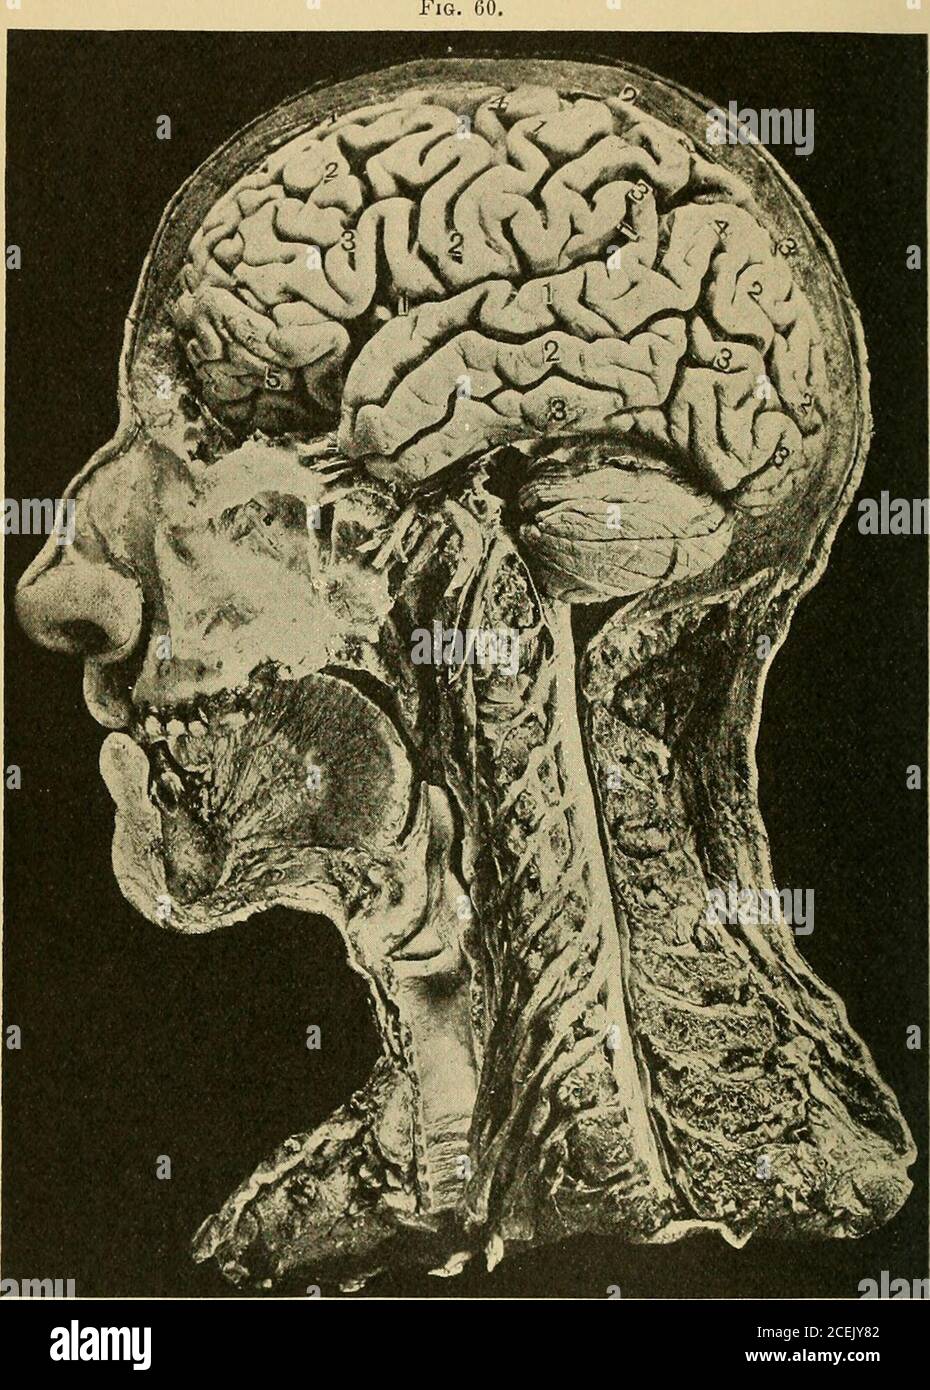 . A treatise on nervous and mental diseases, for students and practitioners of medicine. Photograph from Fraser, showing the cerebrum and the cerebellum in the cavity ofthe skull covered by the membranes; also the upper portion of the spinal cord. I. The longitudinal fissure corresponds with the median line ofthe vertex from the glabella, or junction of the nasal and frontalbones, to the inion, or occipital protuberance. II. To find tlie fi.ssure of Rolando: Measure the distance fromthe glabella to the inion, or occipital protuberance. Find 55.7 80 INTRODUCTORY. per cent, of this distance, and Stock Photo